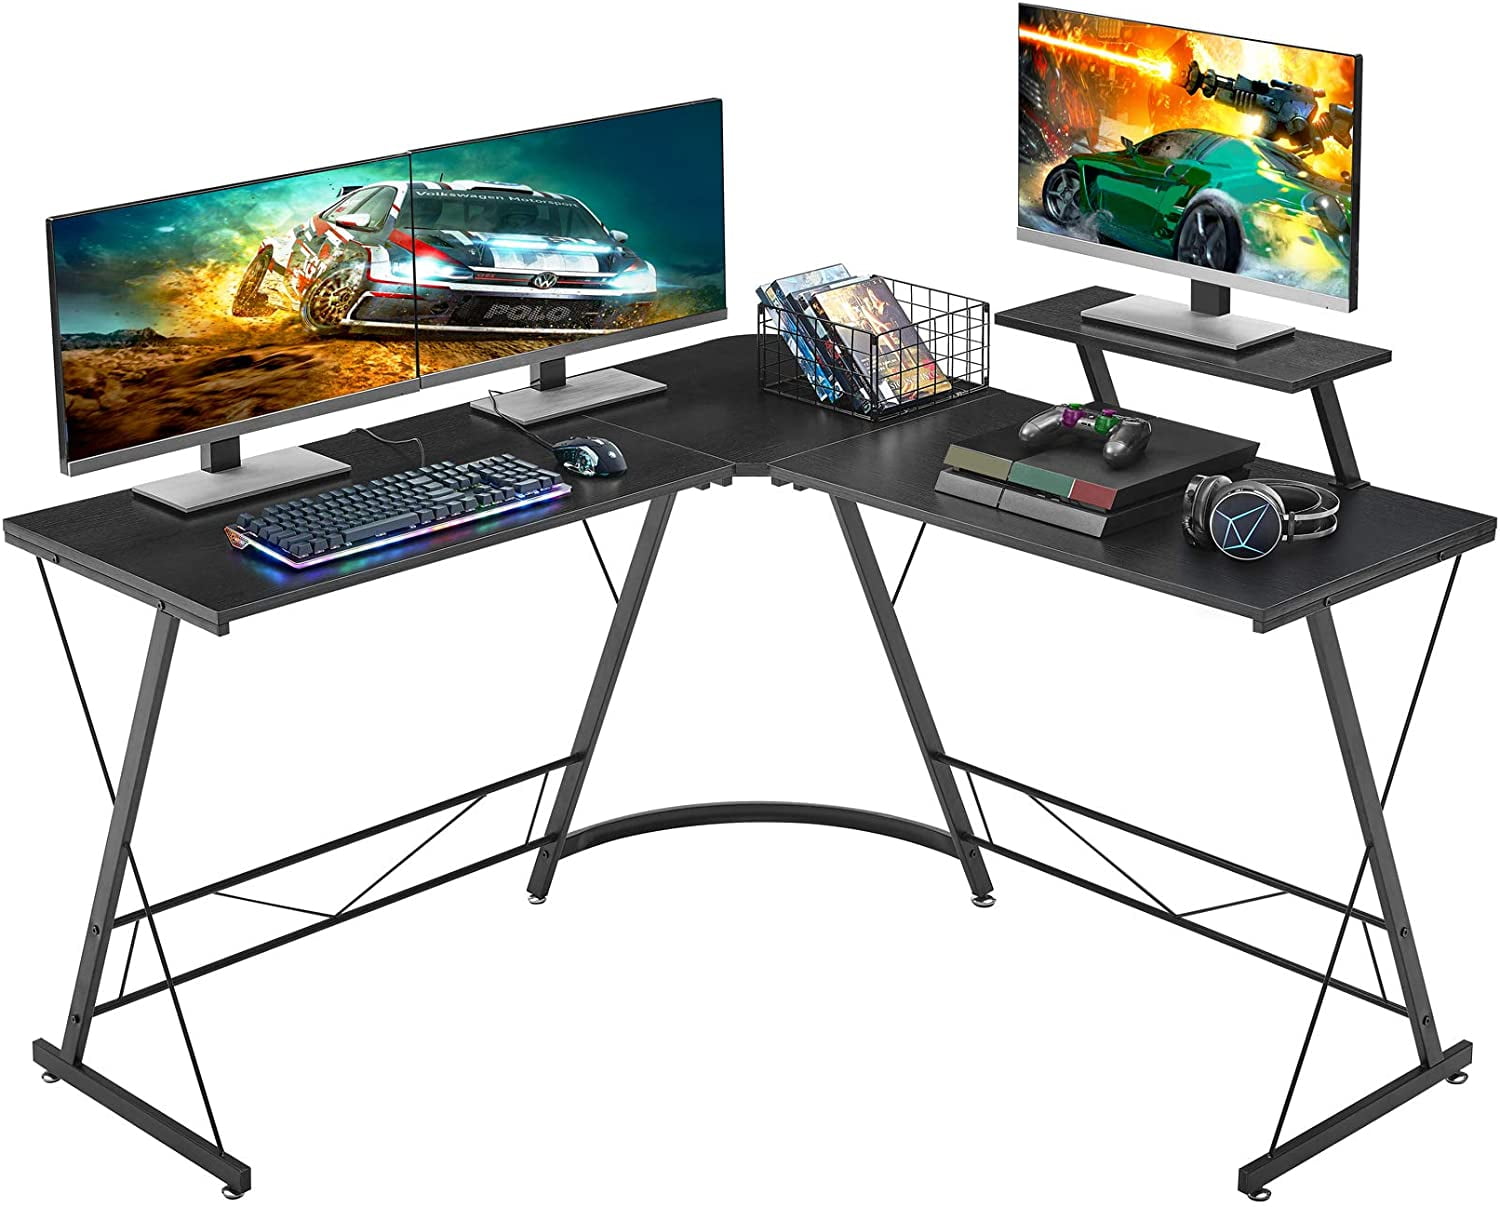 L Shaped Corner Desk，Computer Gaming Desk for Small Space Home Office with Large Monitor Stand Computer Desk with Round Corner